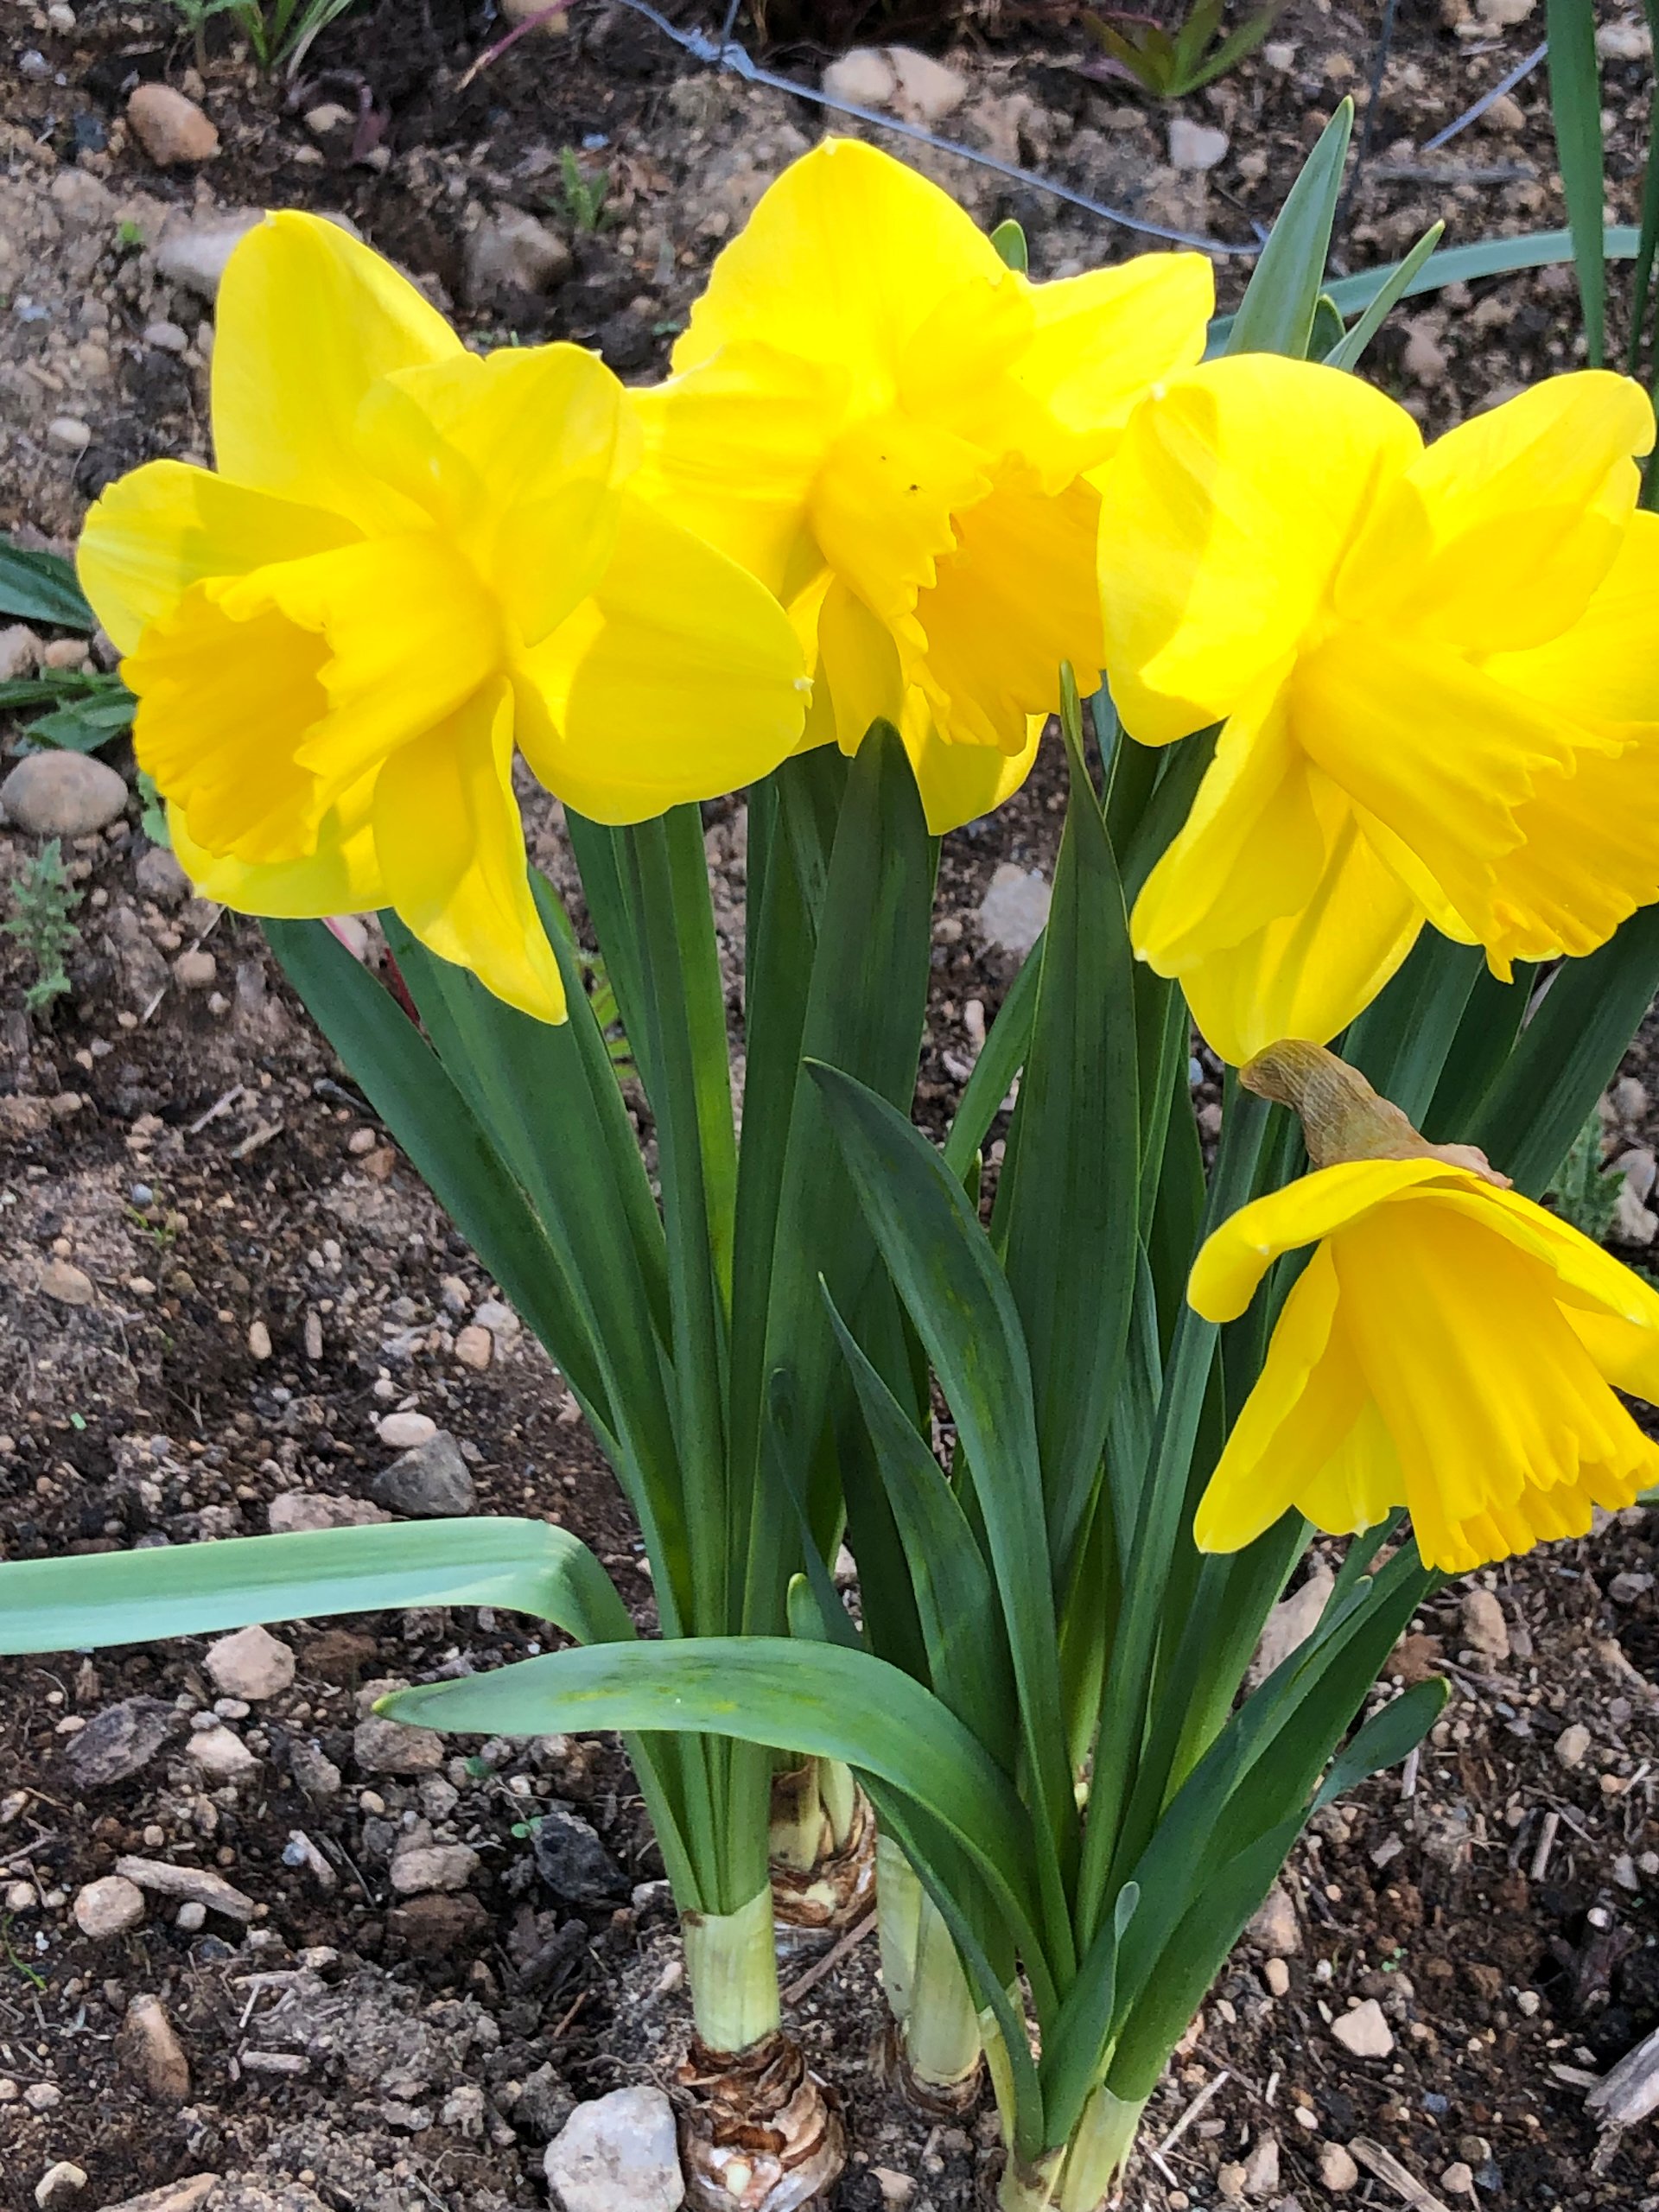  We thought these were mini daffodils when we bought them. Nope, they’re huge! 